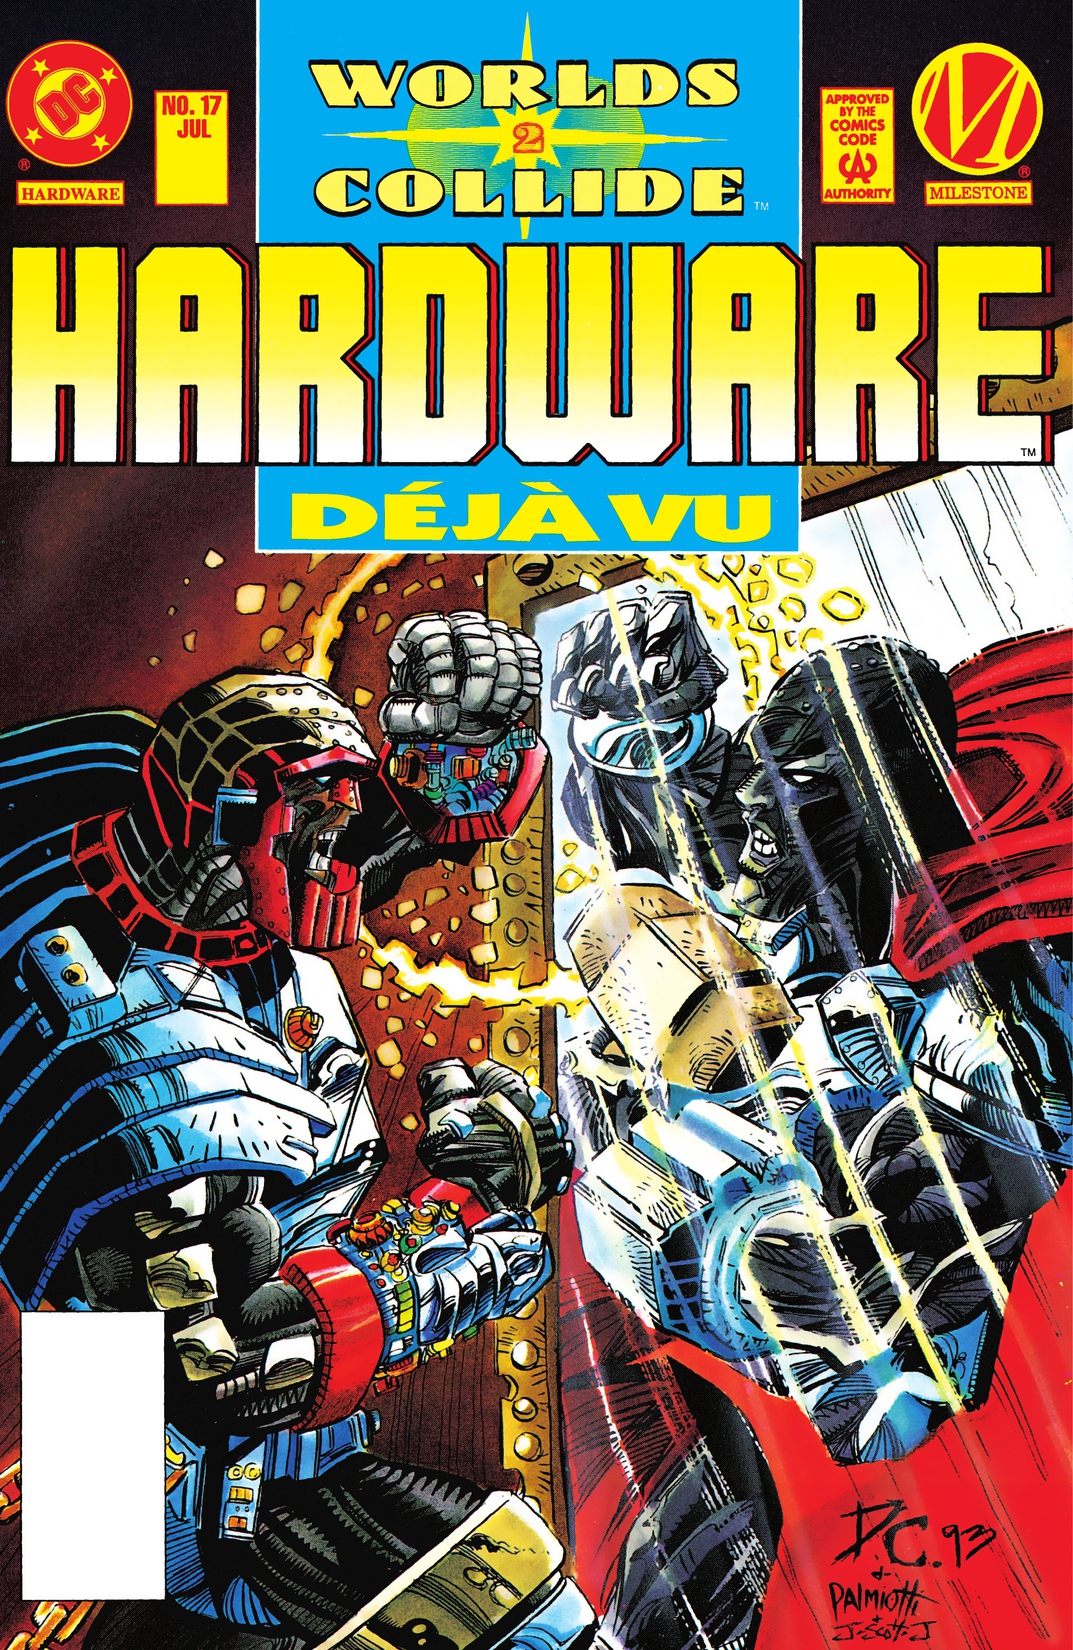 Hardware #17 preview images